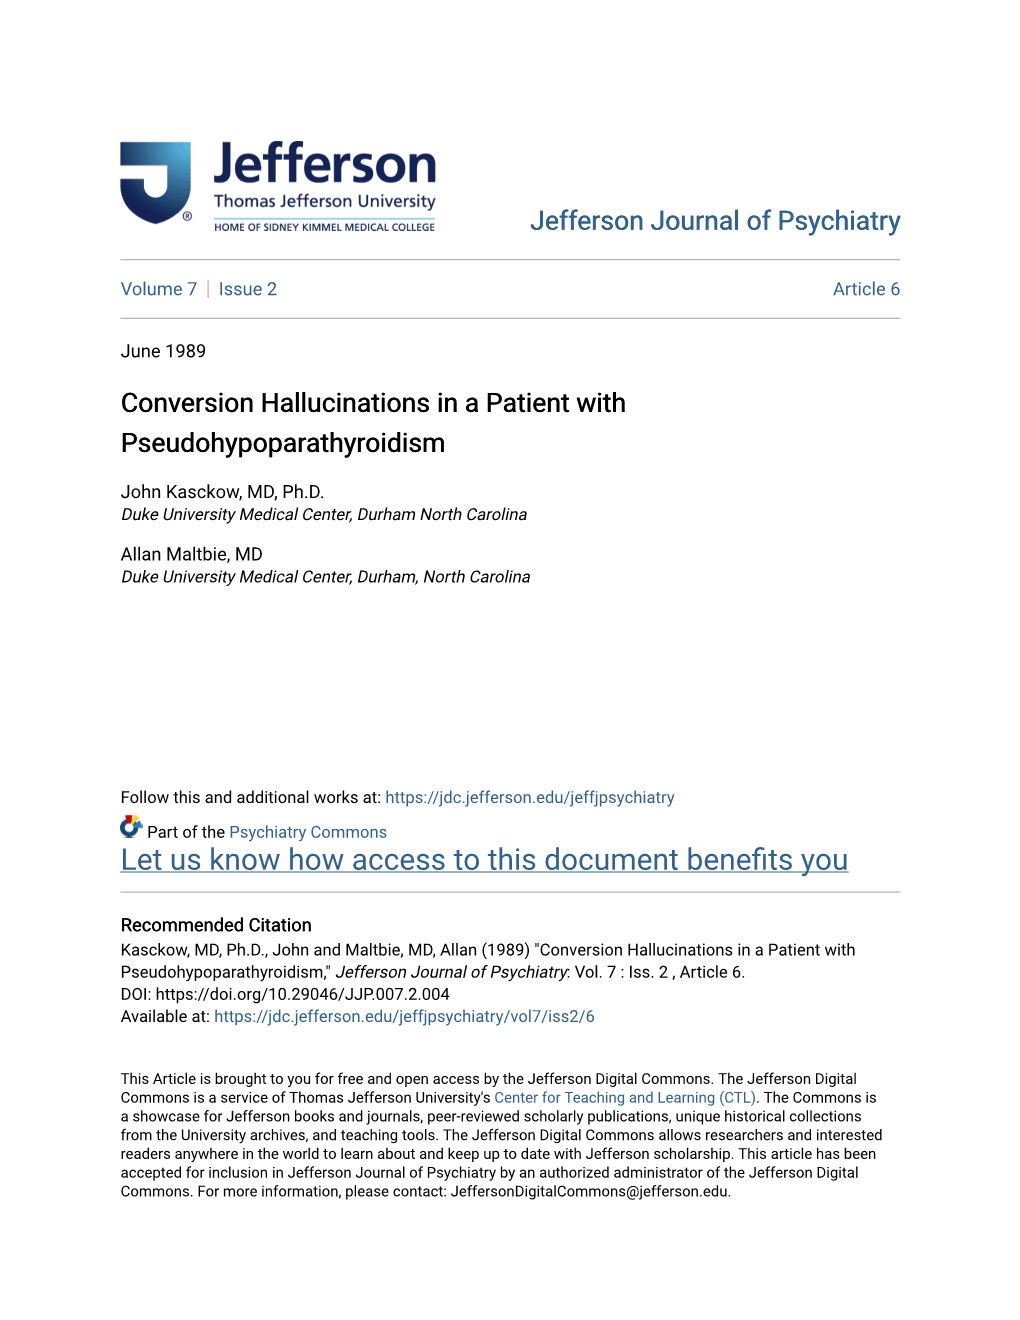 Conversion Hallucinations in a Patient with Pseudohypoparathyroidism